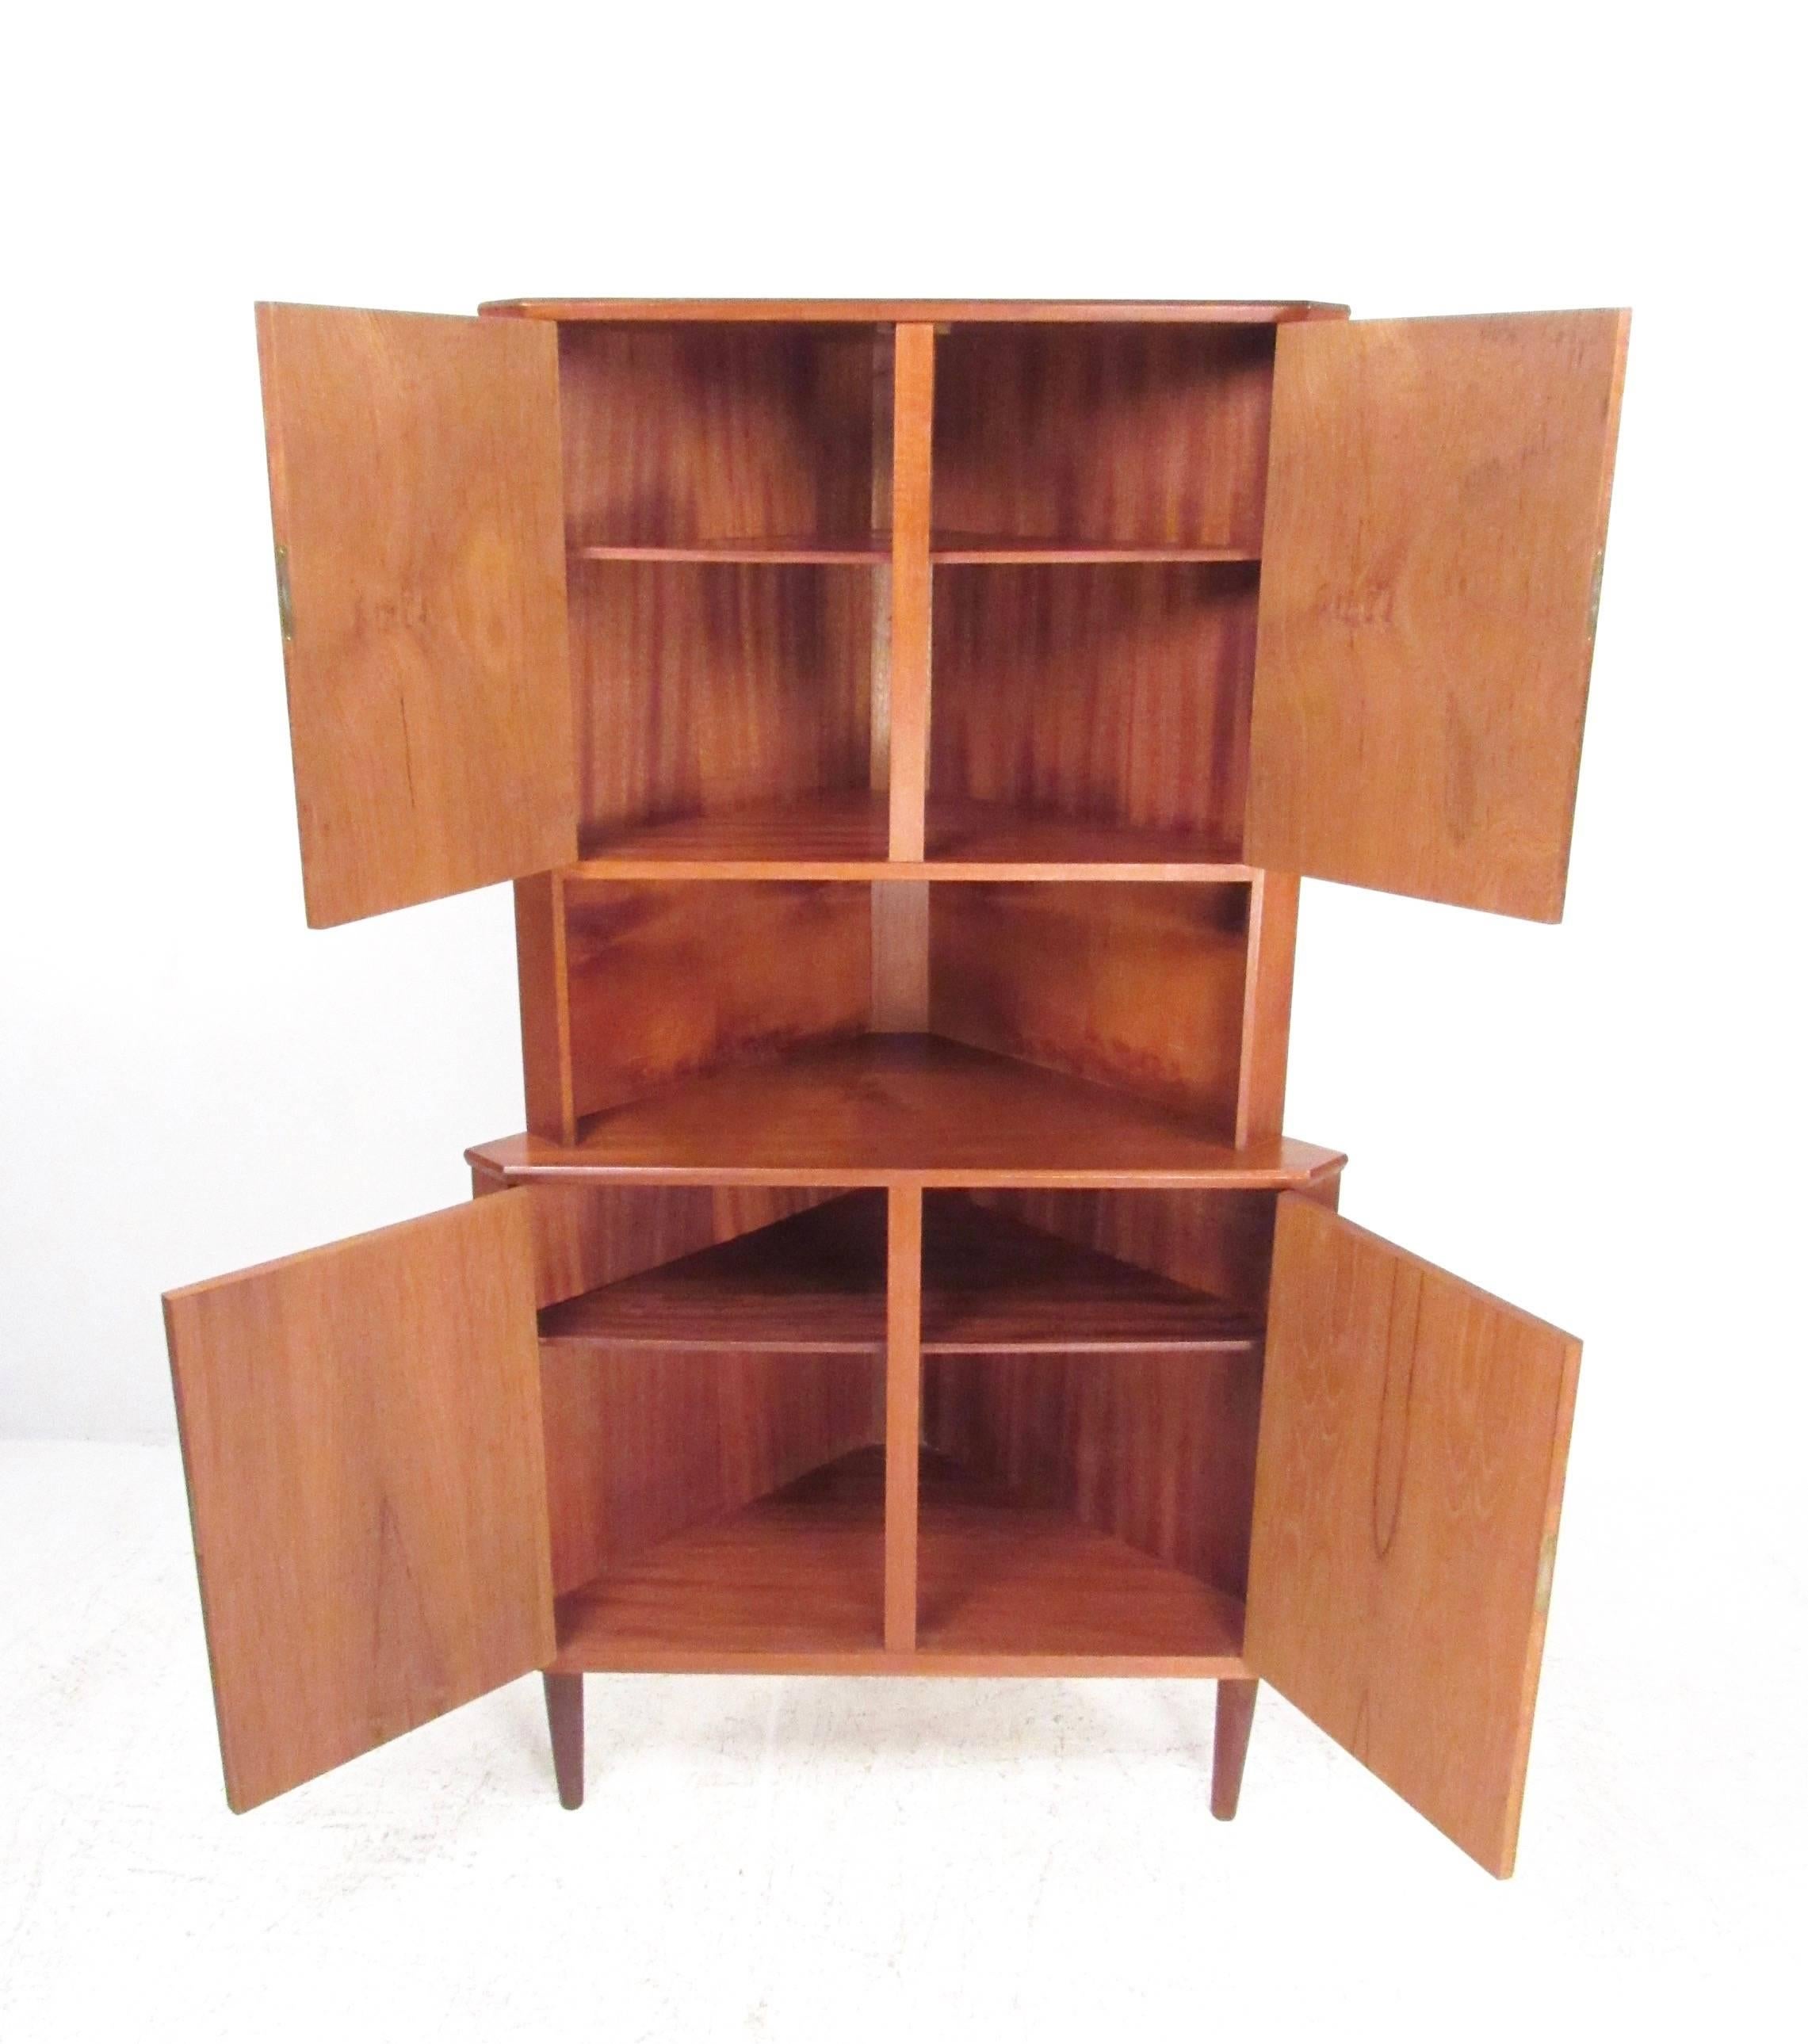 This unique Danish teak corner cabinet features quality Scandinavian Modern construction, dual locking cabinets and open counter storage. Stylish Mid-Century teak storage piece offers spacious interior shelves for storage. Please confirm item